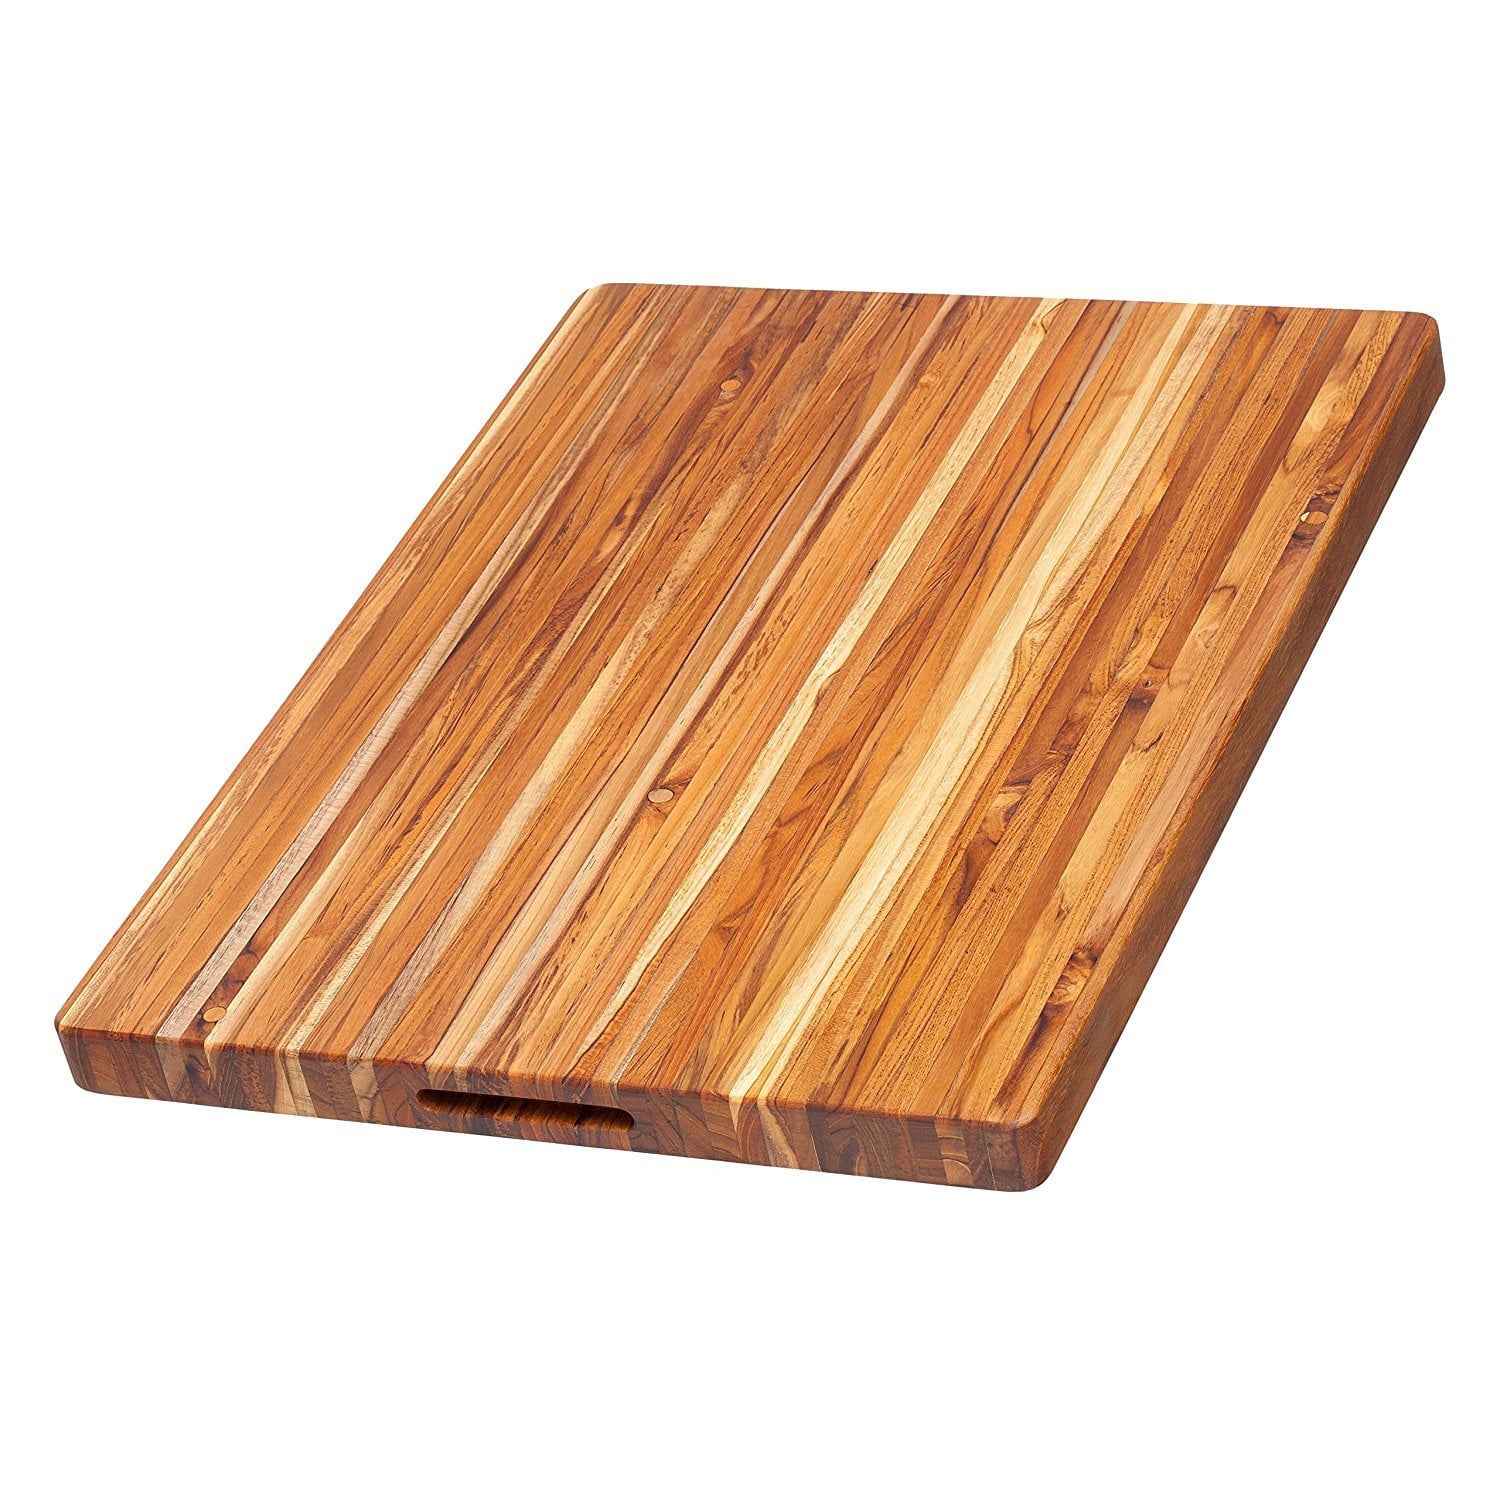 Winco Wooden Cutting Boards, 12 x 18